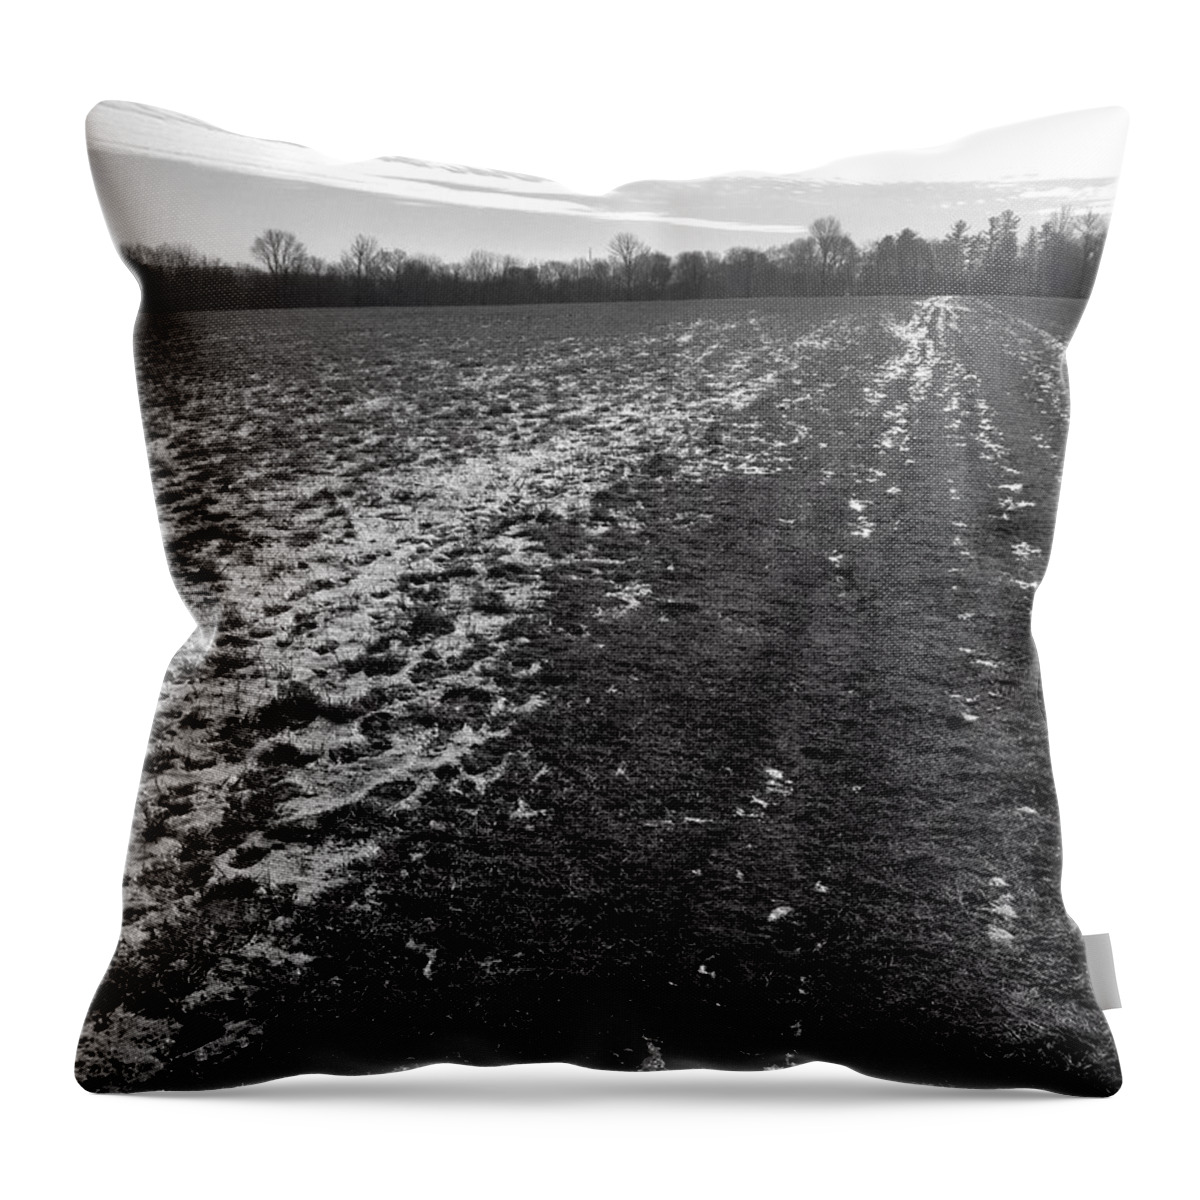  Throw Pillow featuring the photograph Walking in the Winter Field by Polly Castor